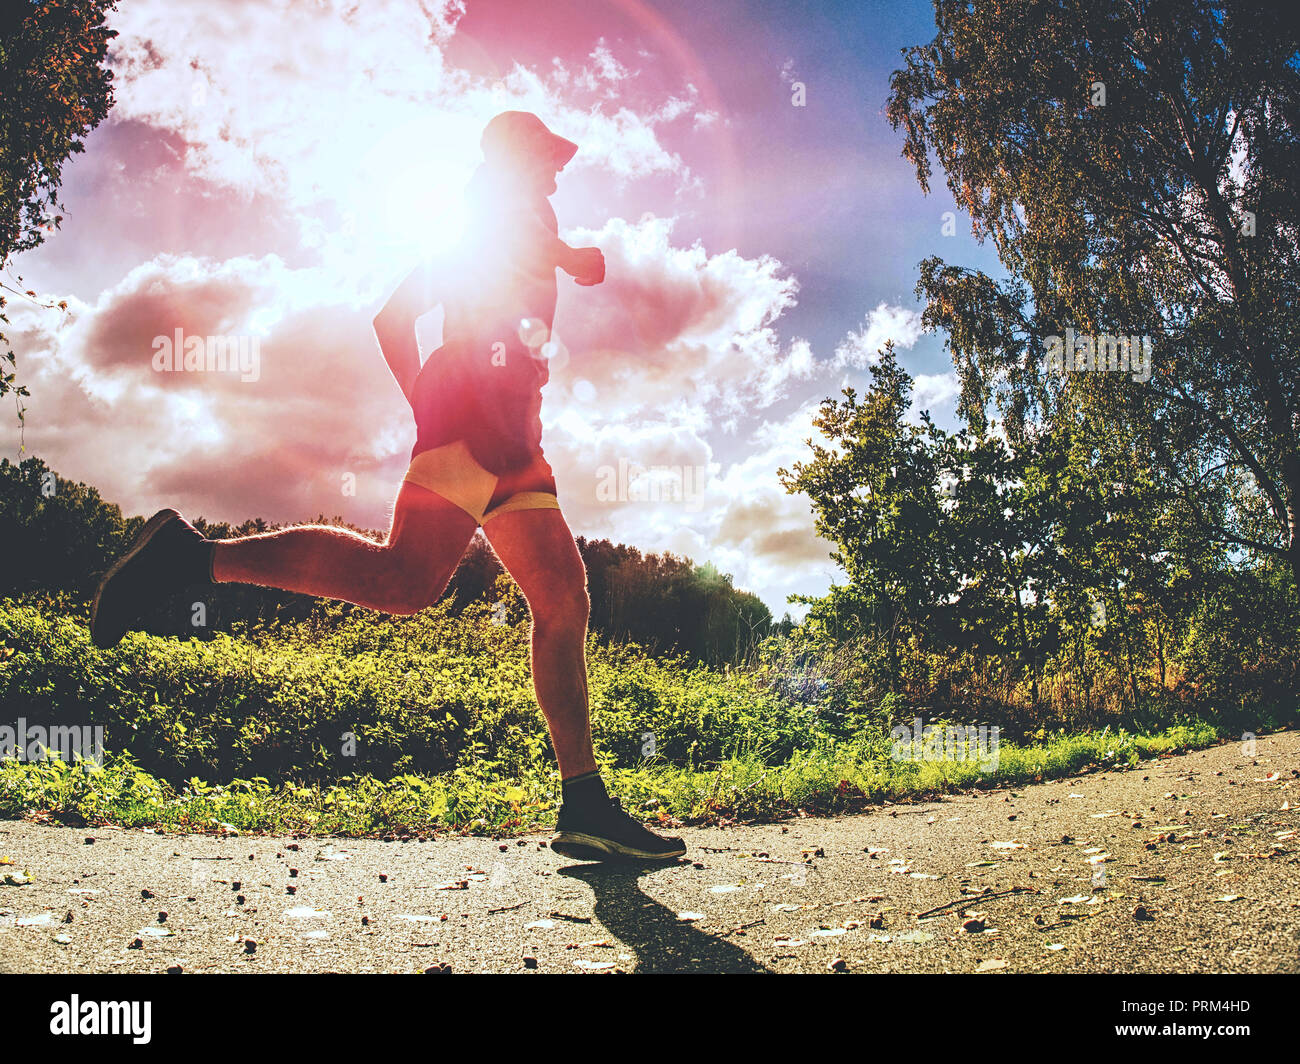 Jogging tall sports man in trees shadows with sun light behind him while wearing black yellow shorts and blue jogging attire Stock Photo